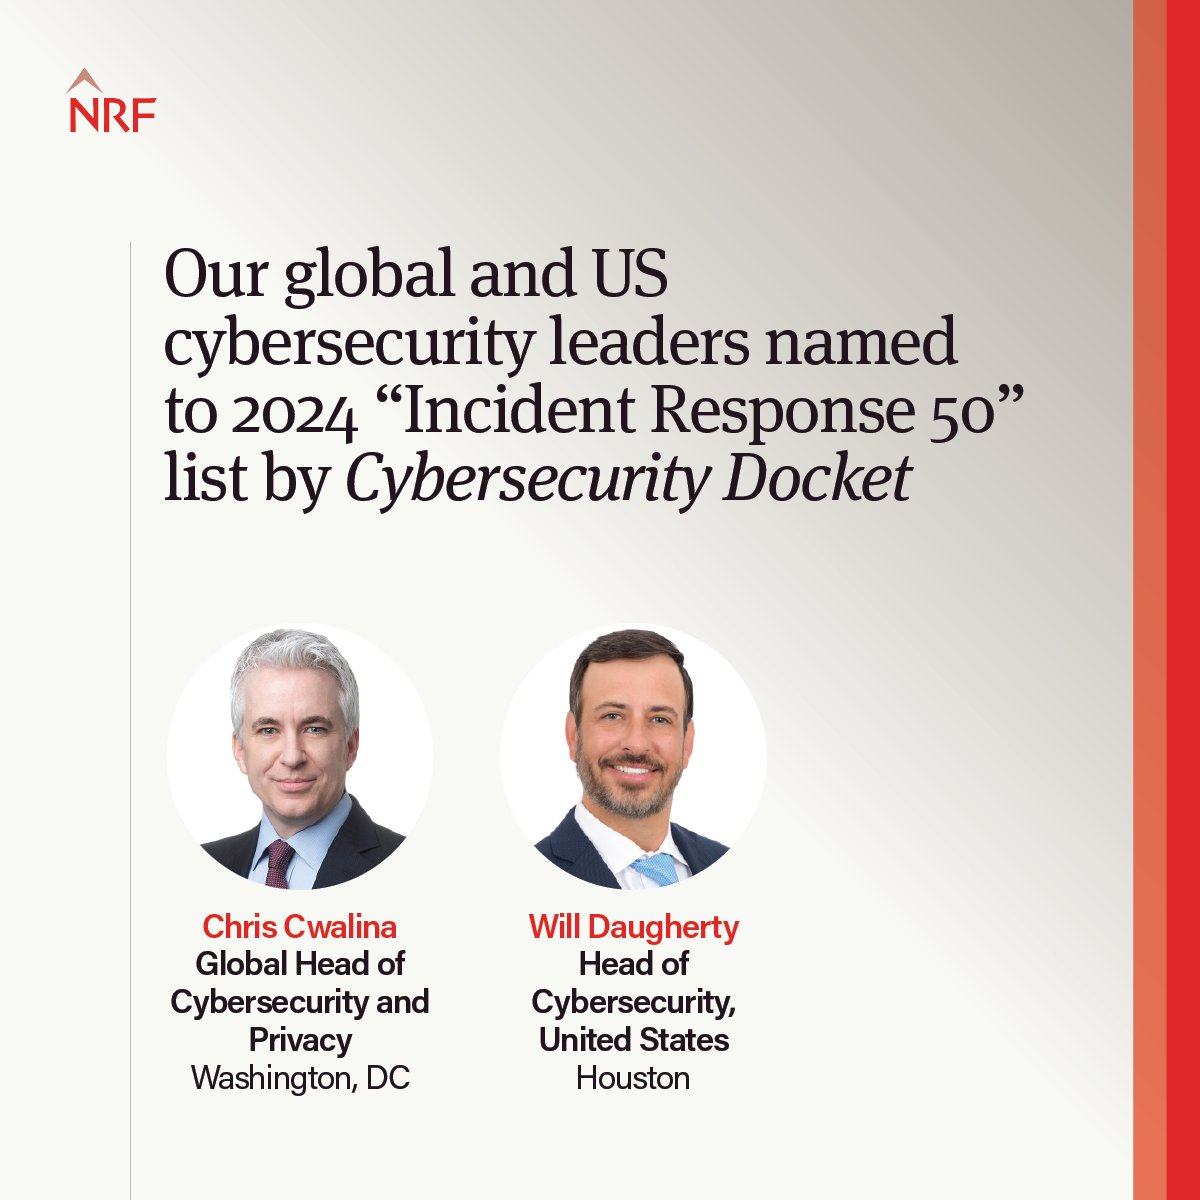 We’re pleased to announce that Global Head of Cybersecurity and Privacy Chris Cwalina and US Head of Cybersecurity Will Daugherty have been named as two of the top 50 data breach response lawyers by Cybersecurity Docket ow.ly/gs8R50Rk4N6